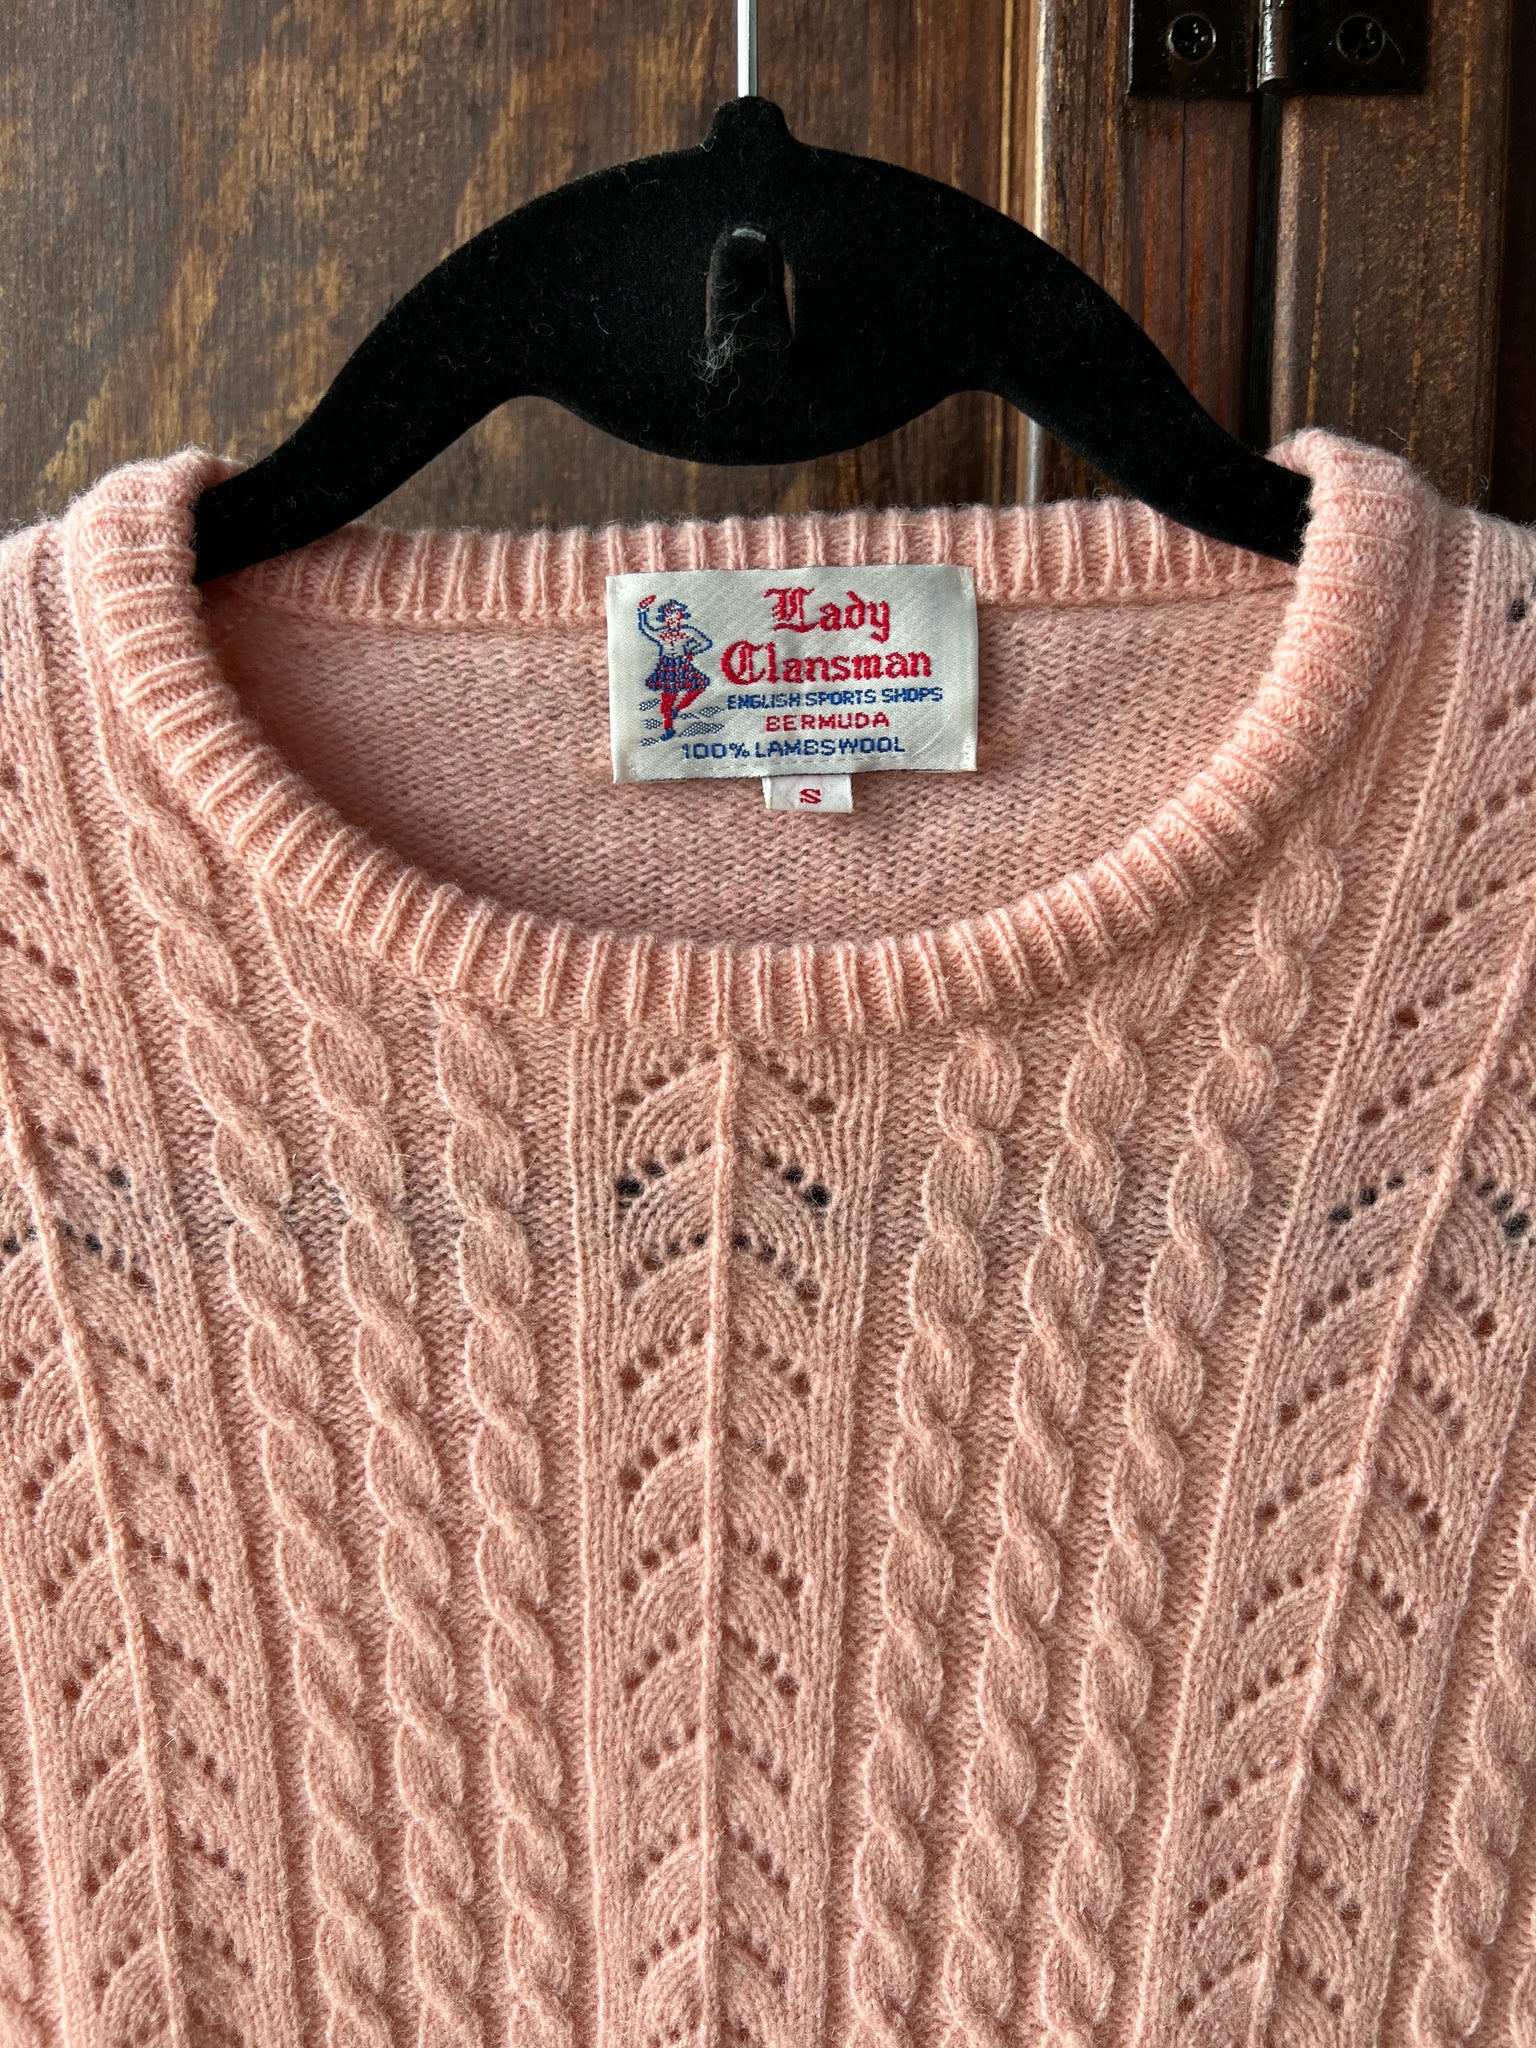 1960s SWEATER- Lady Clansman Pink cableknit light wool